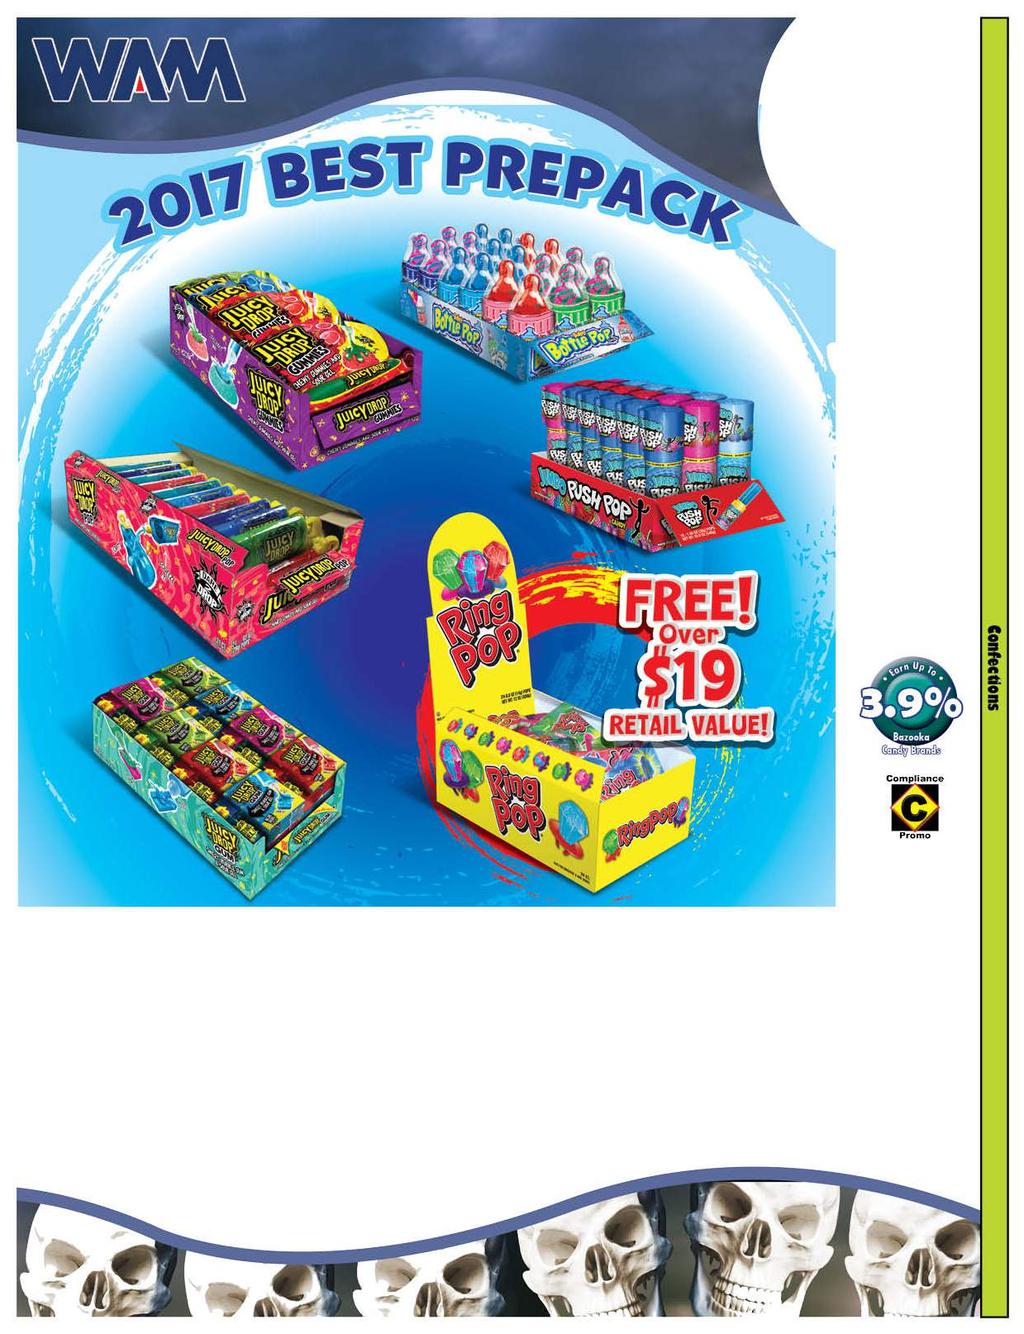 43.2% CT. Description UPC Item # Bazooka Candy Brands 2017 Best Pre-Pack w/free Box of Ring Pops #BCBG024103-17 Delivery Date: 10/22/17 0-41116- 994-925 $100.88 43.